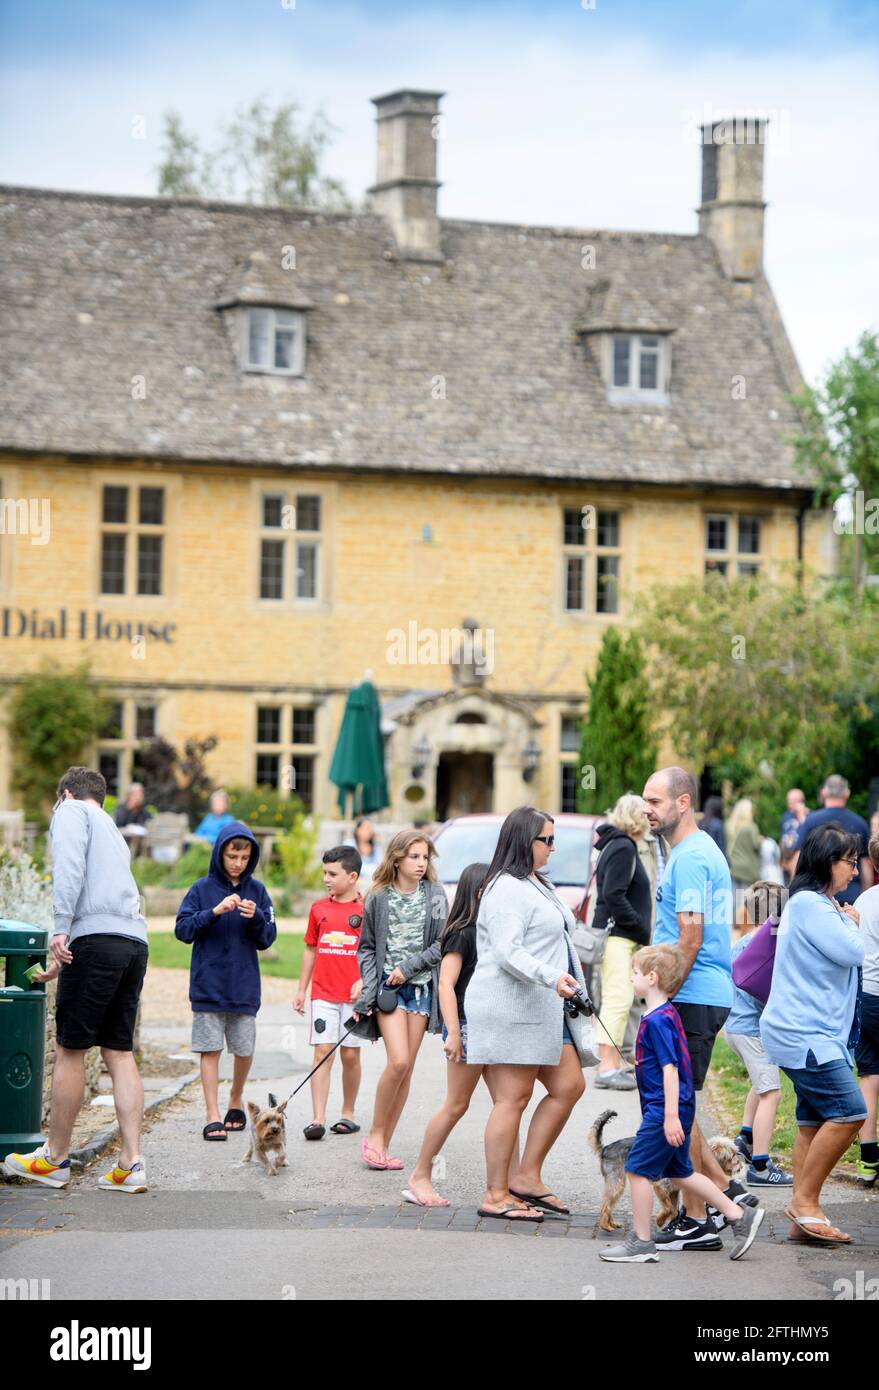 Crowds in the Cotswold village of Bourton-on-the-Water which is experiencing unprecedented visitor numbers during the Coronavirus pandemic Stock Photo